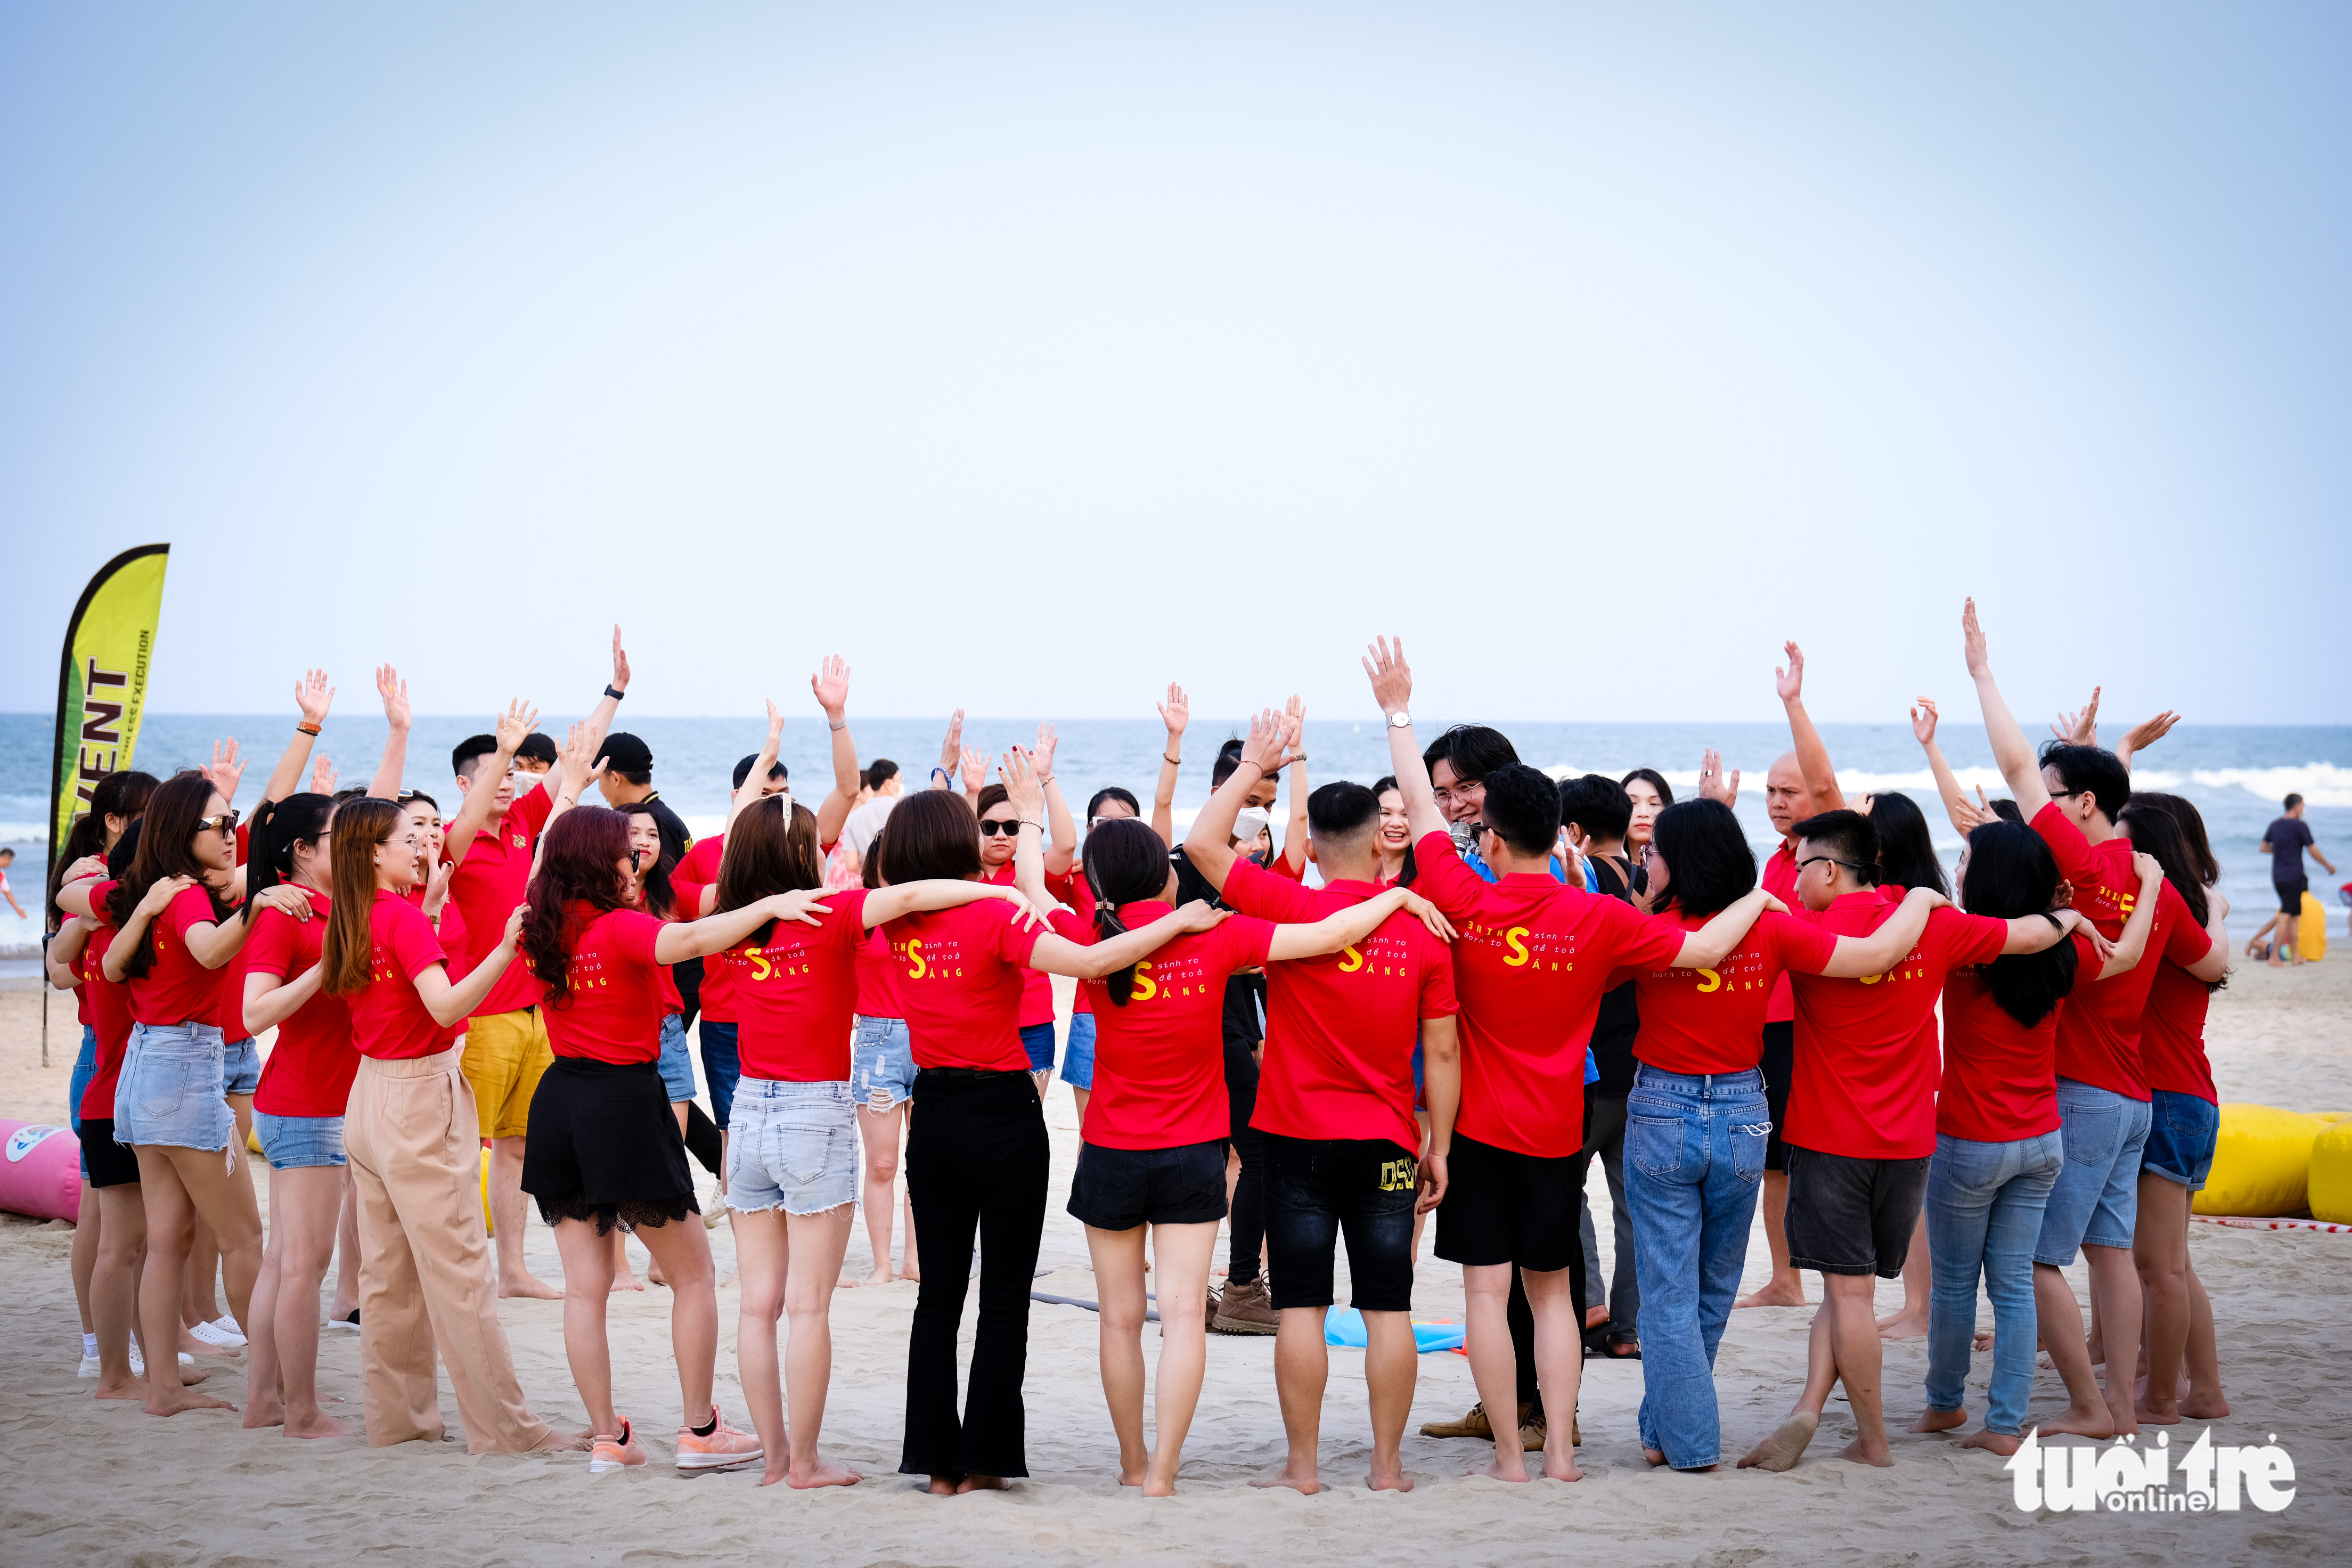 Employees of a company participate in team building activities at a beach in Da Nang City, Vietnam, April 11, 2022. Photo: Tan Luc / Tuoi Tre